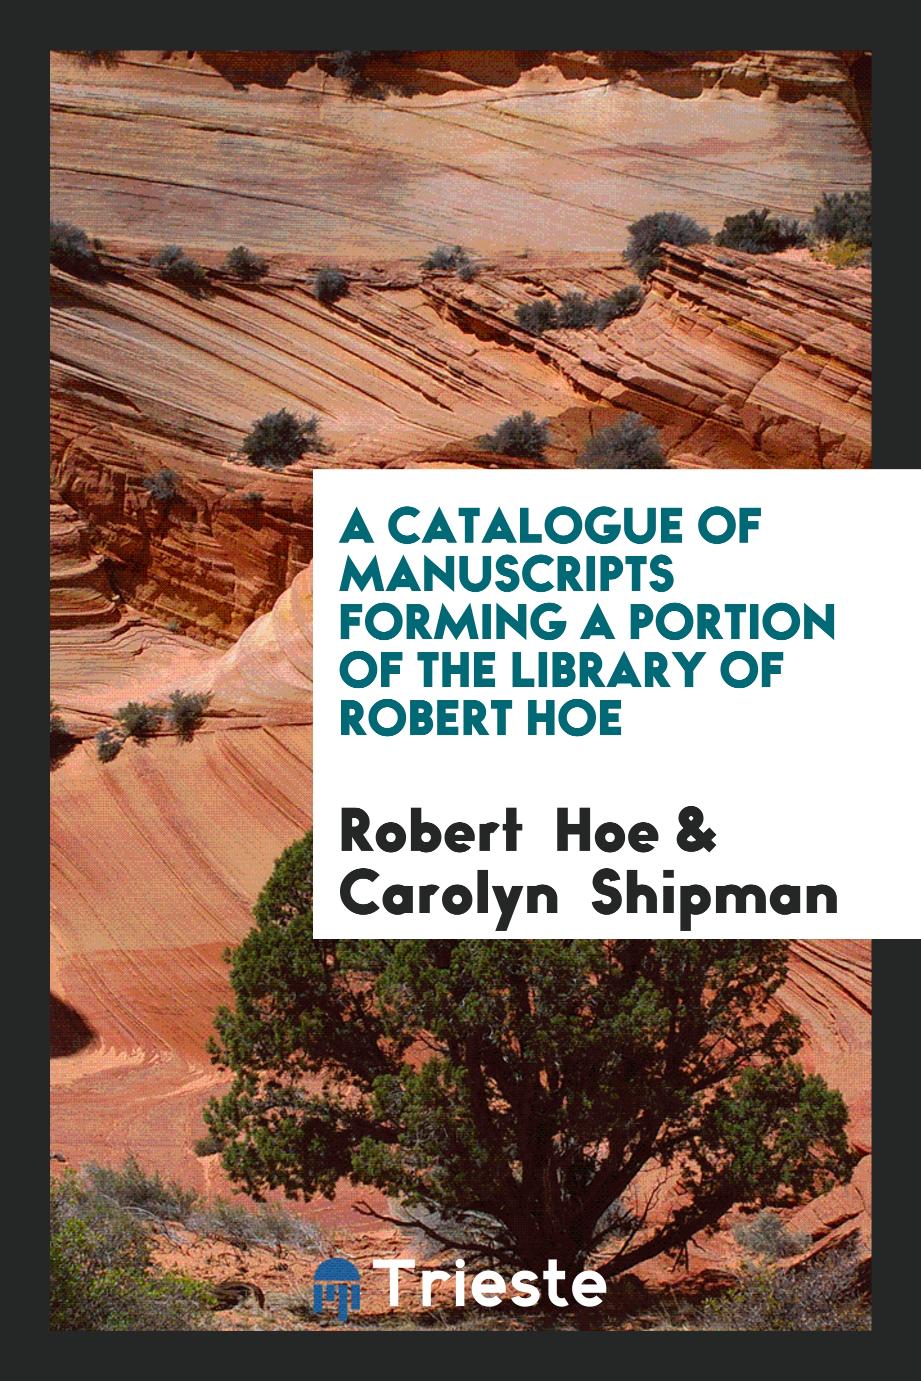 A Catalogue of Manuscripts Forming a Portion of the Library of Robert Hoe